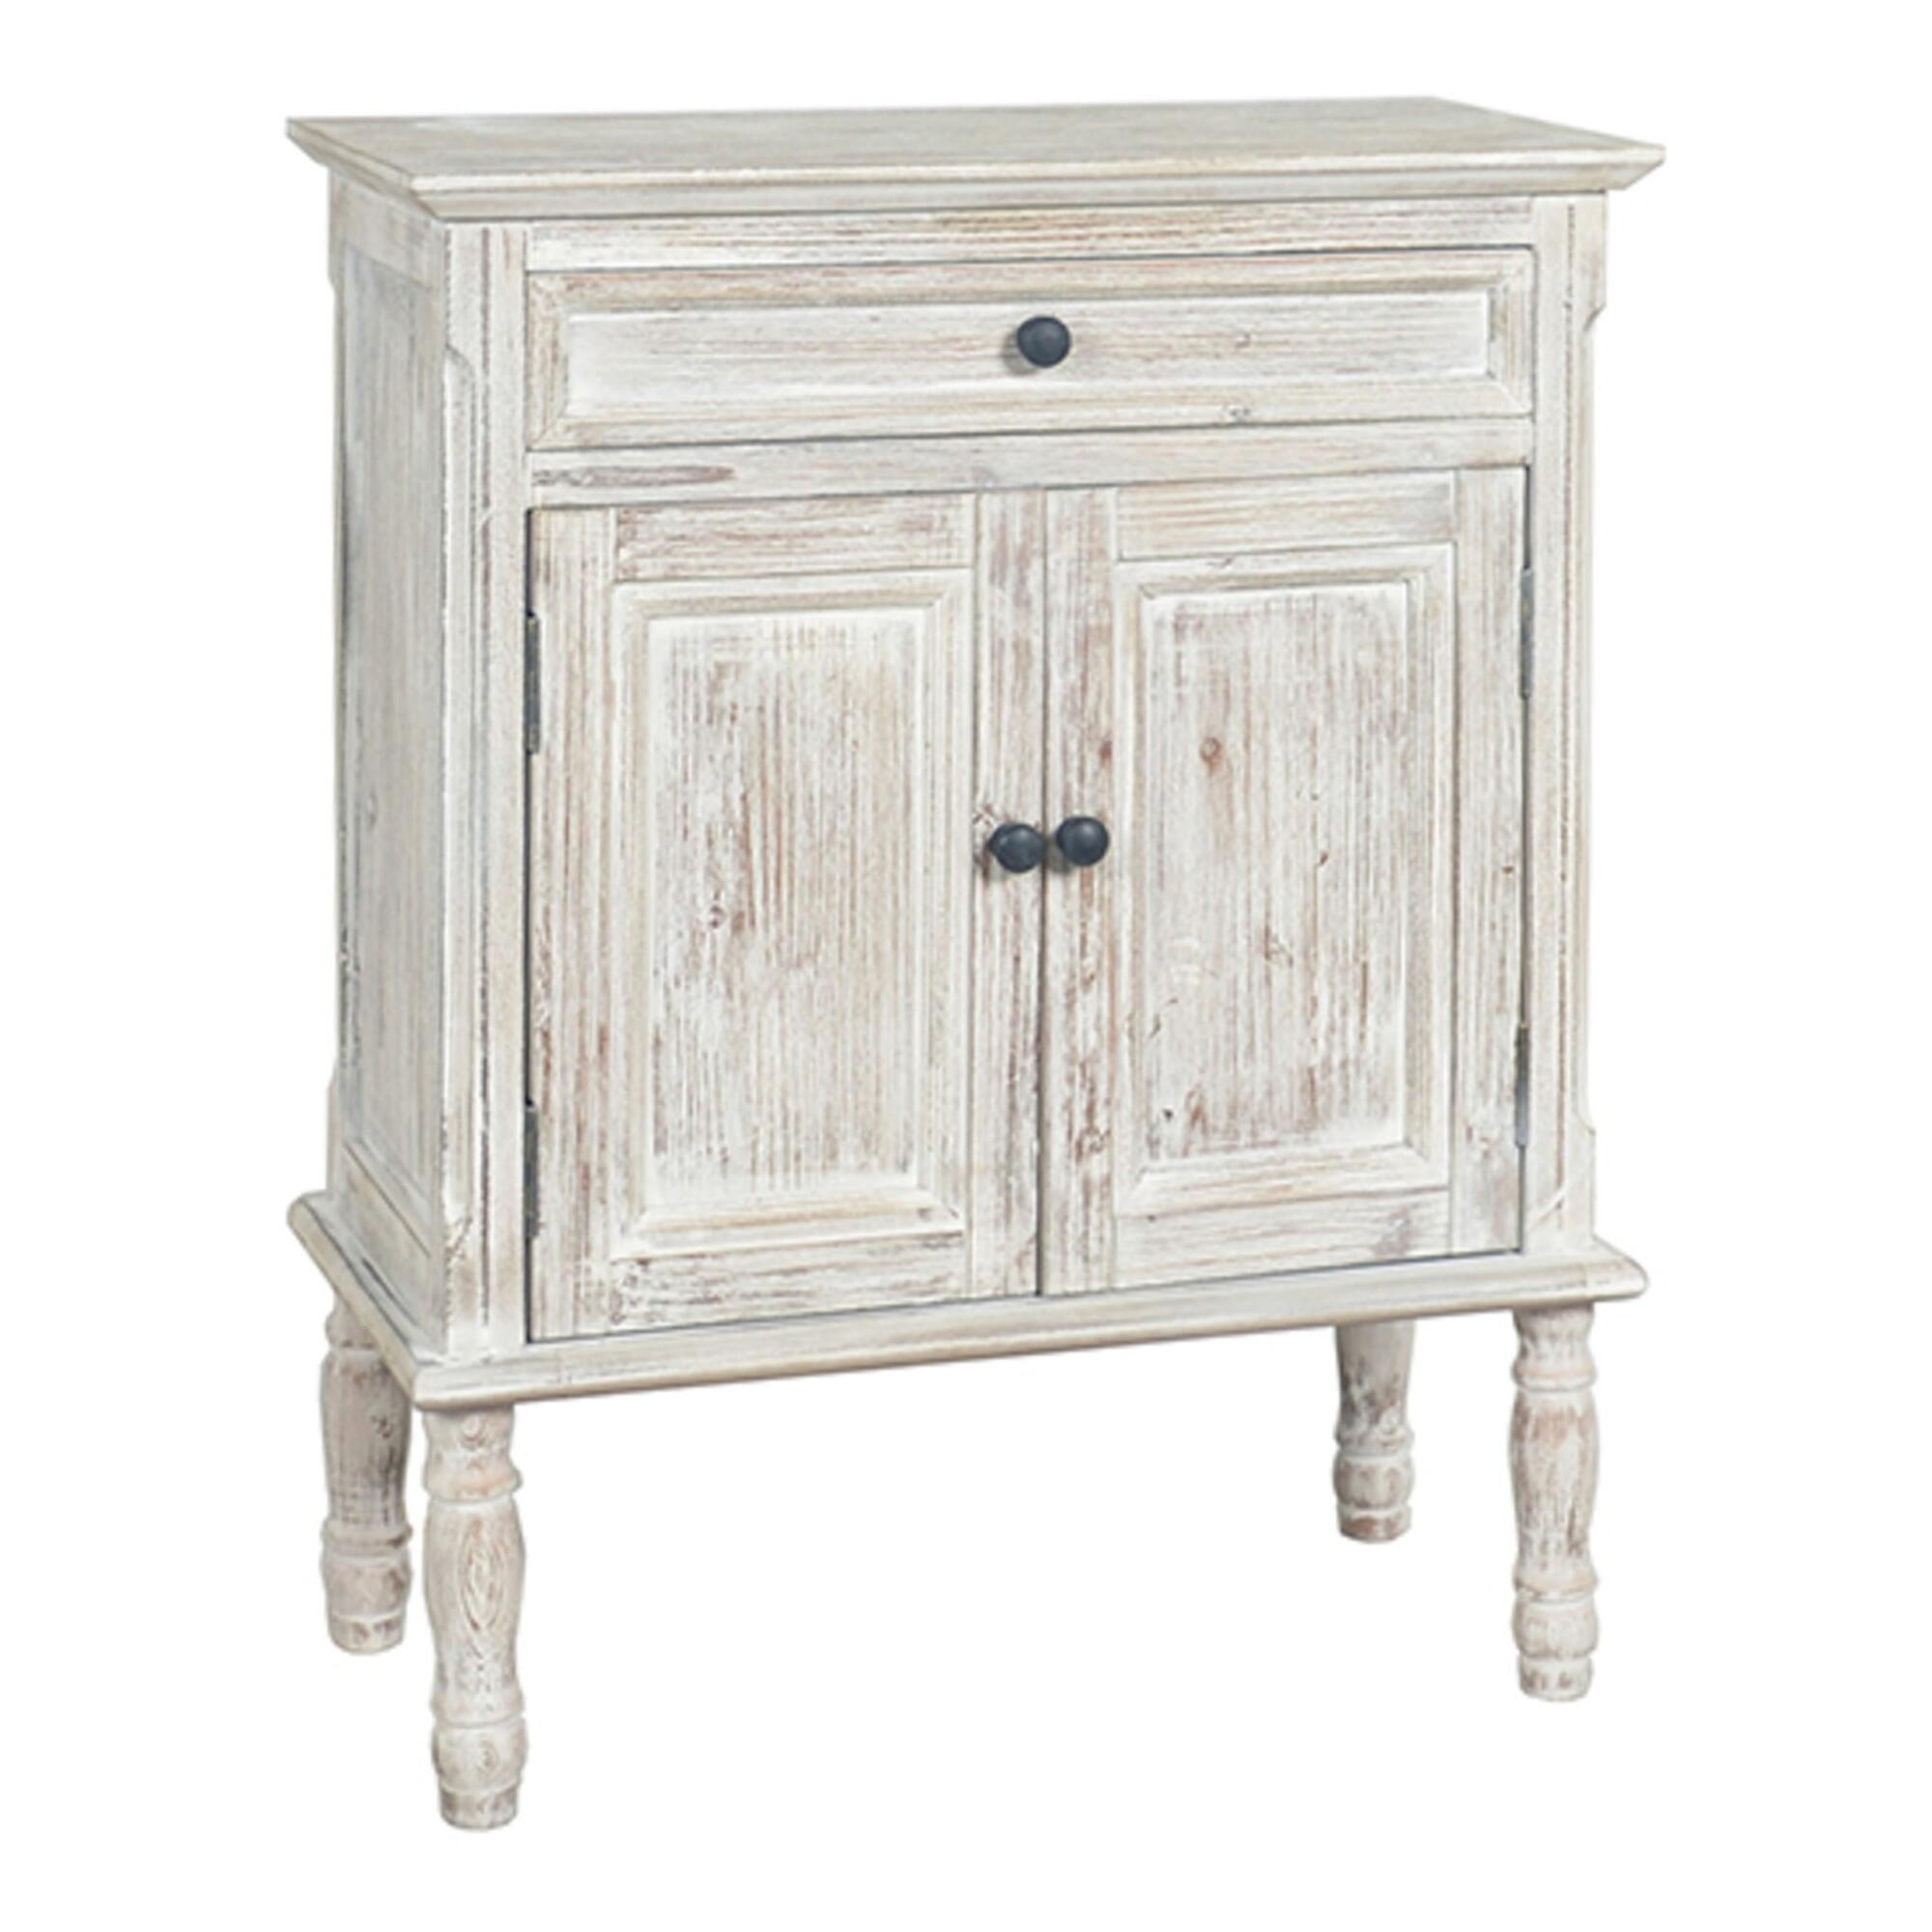 Distressed Wood Conway Storage Cabinet: White by World Market